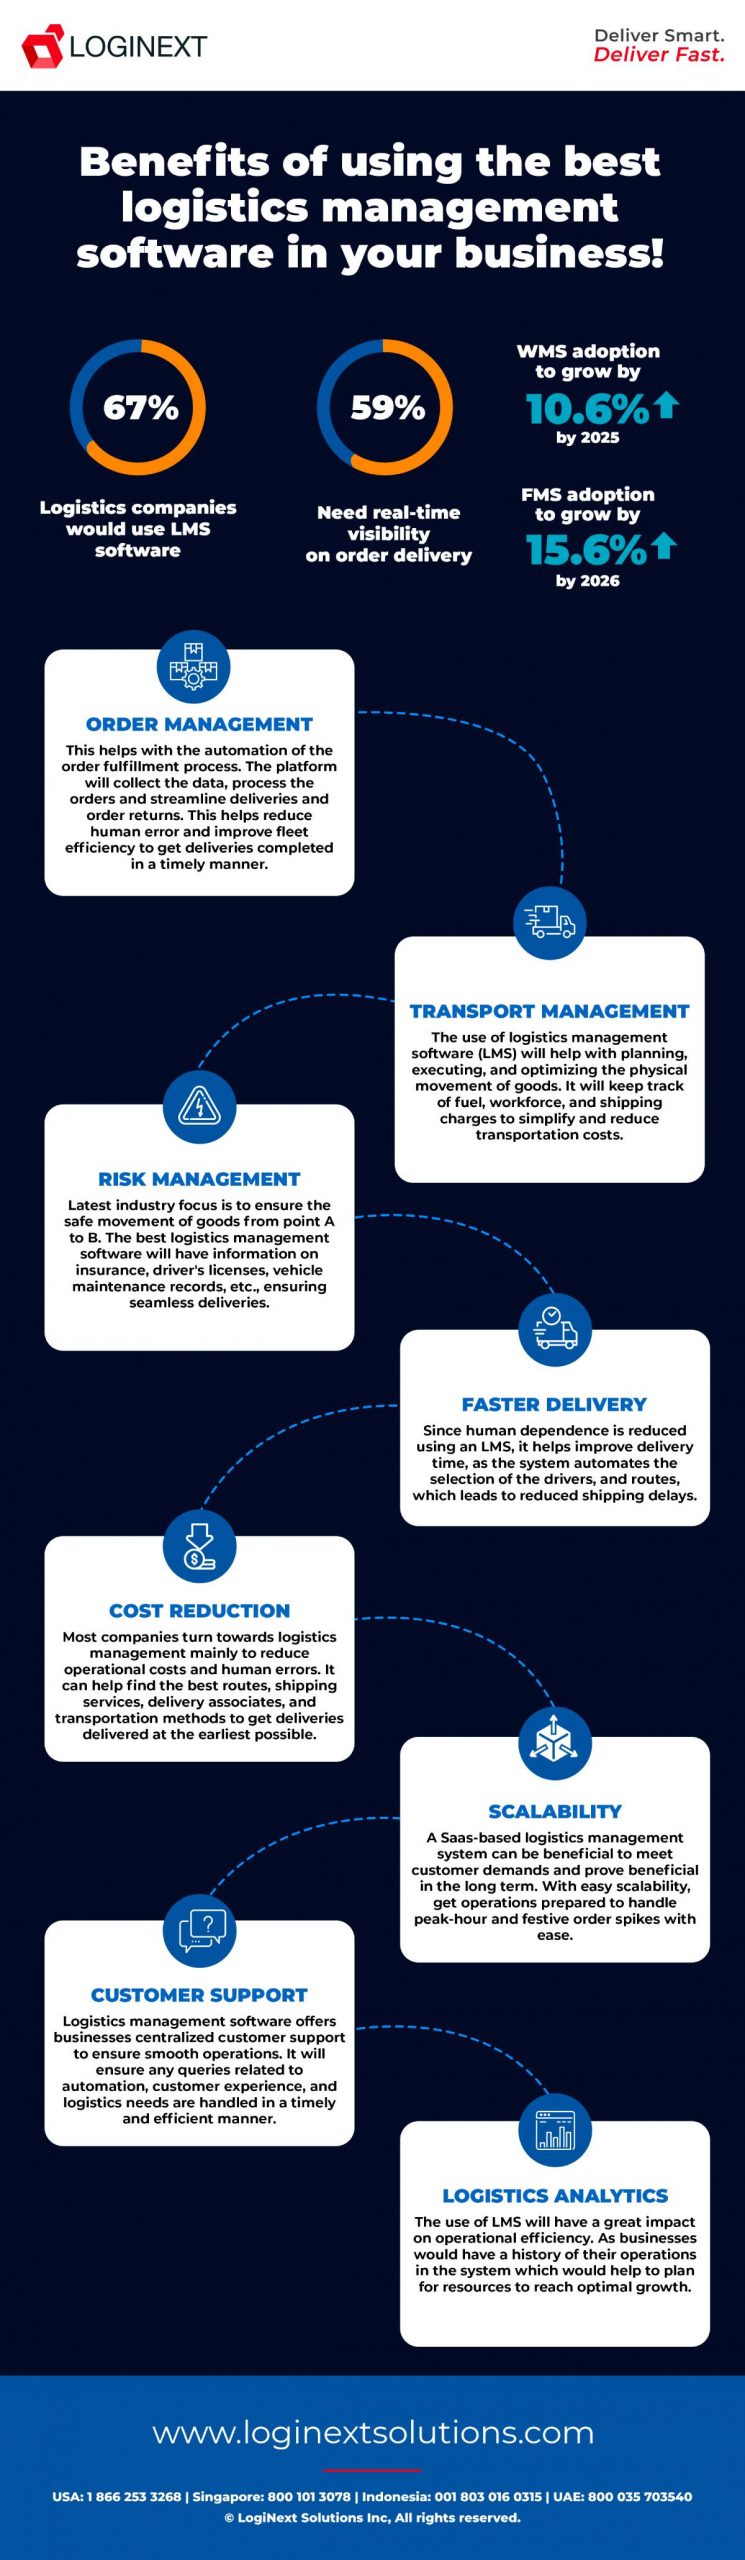 Infographic on benefits using the best logistics management software